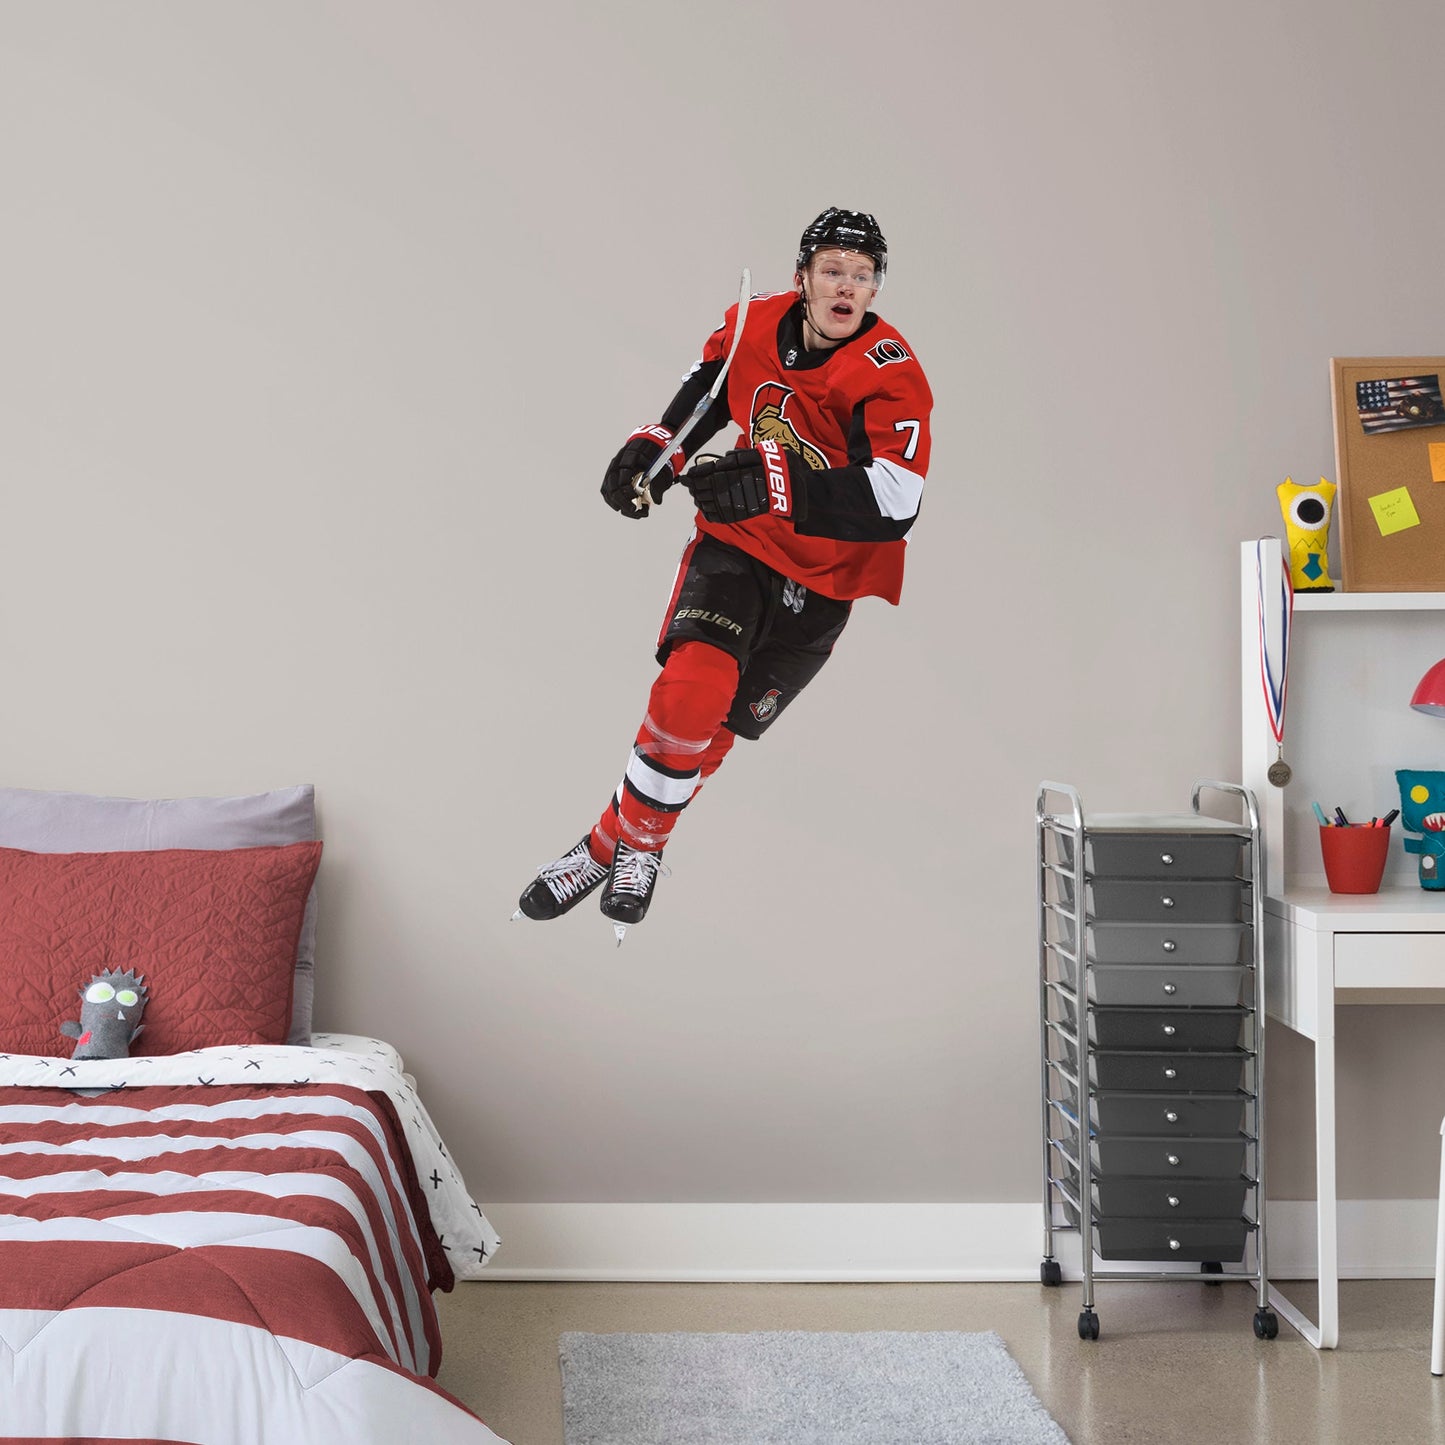 Giant Athlete + 2 Team Decals (29"W x 51"H) Power forward Brady Tkachuk quickly made his mark in the NHL when he lead the Senators to victory, and now he's skating to life in your office, bedroom, or fan room in this Officially Licensed NHL wall decal. Ottawa fans and NHL fanatics alike will love the touch of action that Tkachuk brings, and this durable and removable wall decal will definitely stand up to the challenge, no matter how many times you restick it!